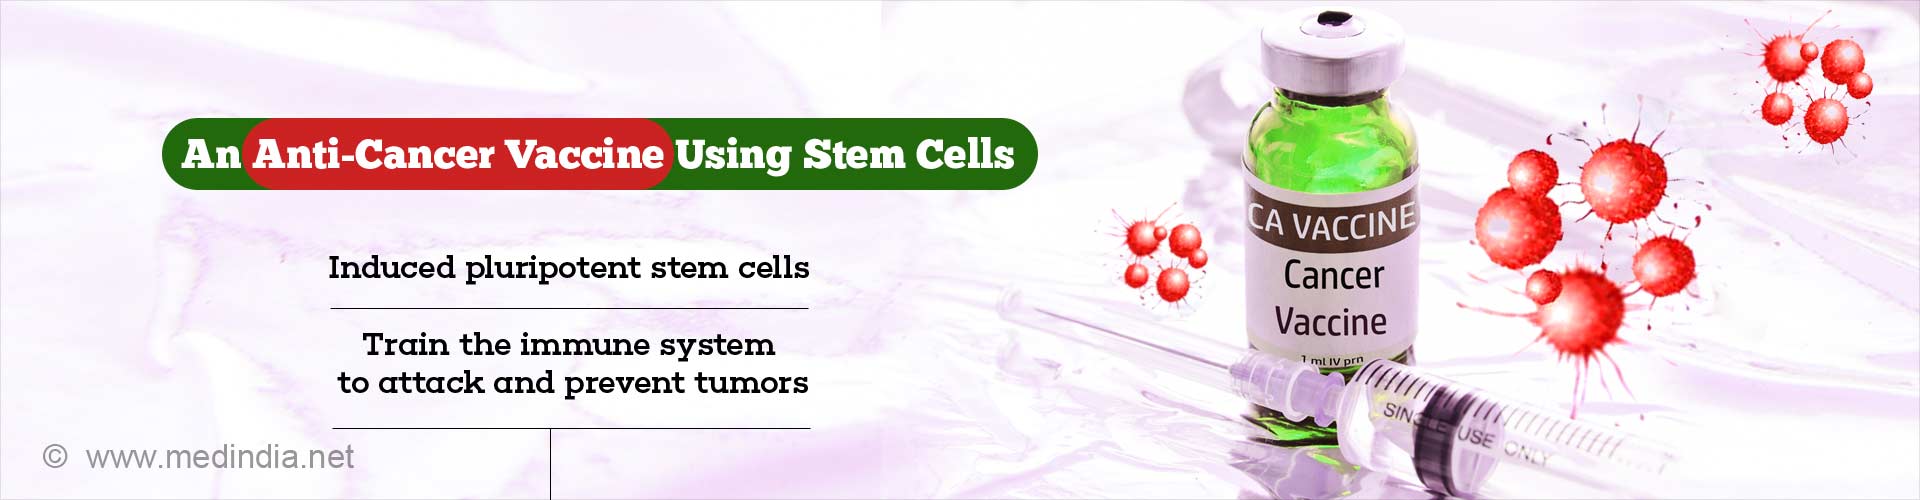 an anti-cancer vaccine using stem cells
- induced pluripotent stem cells
- train the immune system to attack and prevent tumors